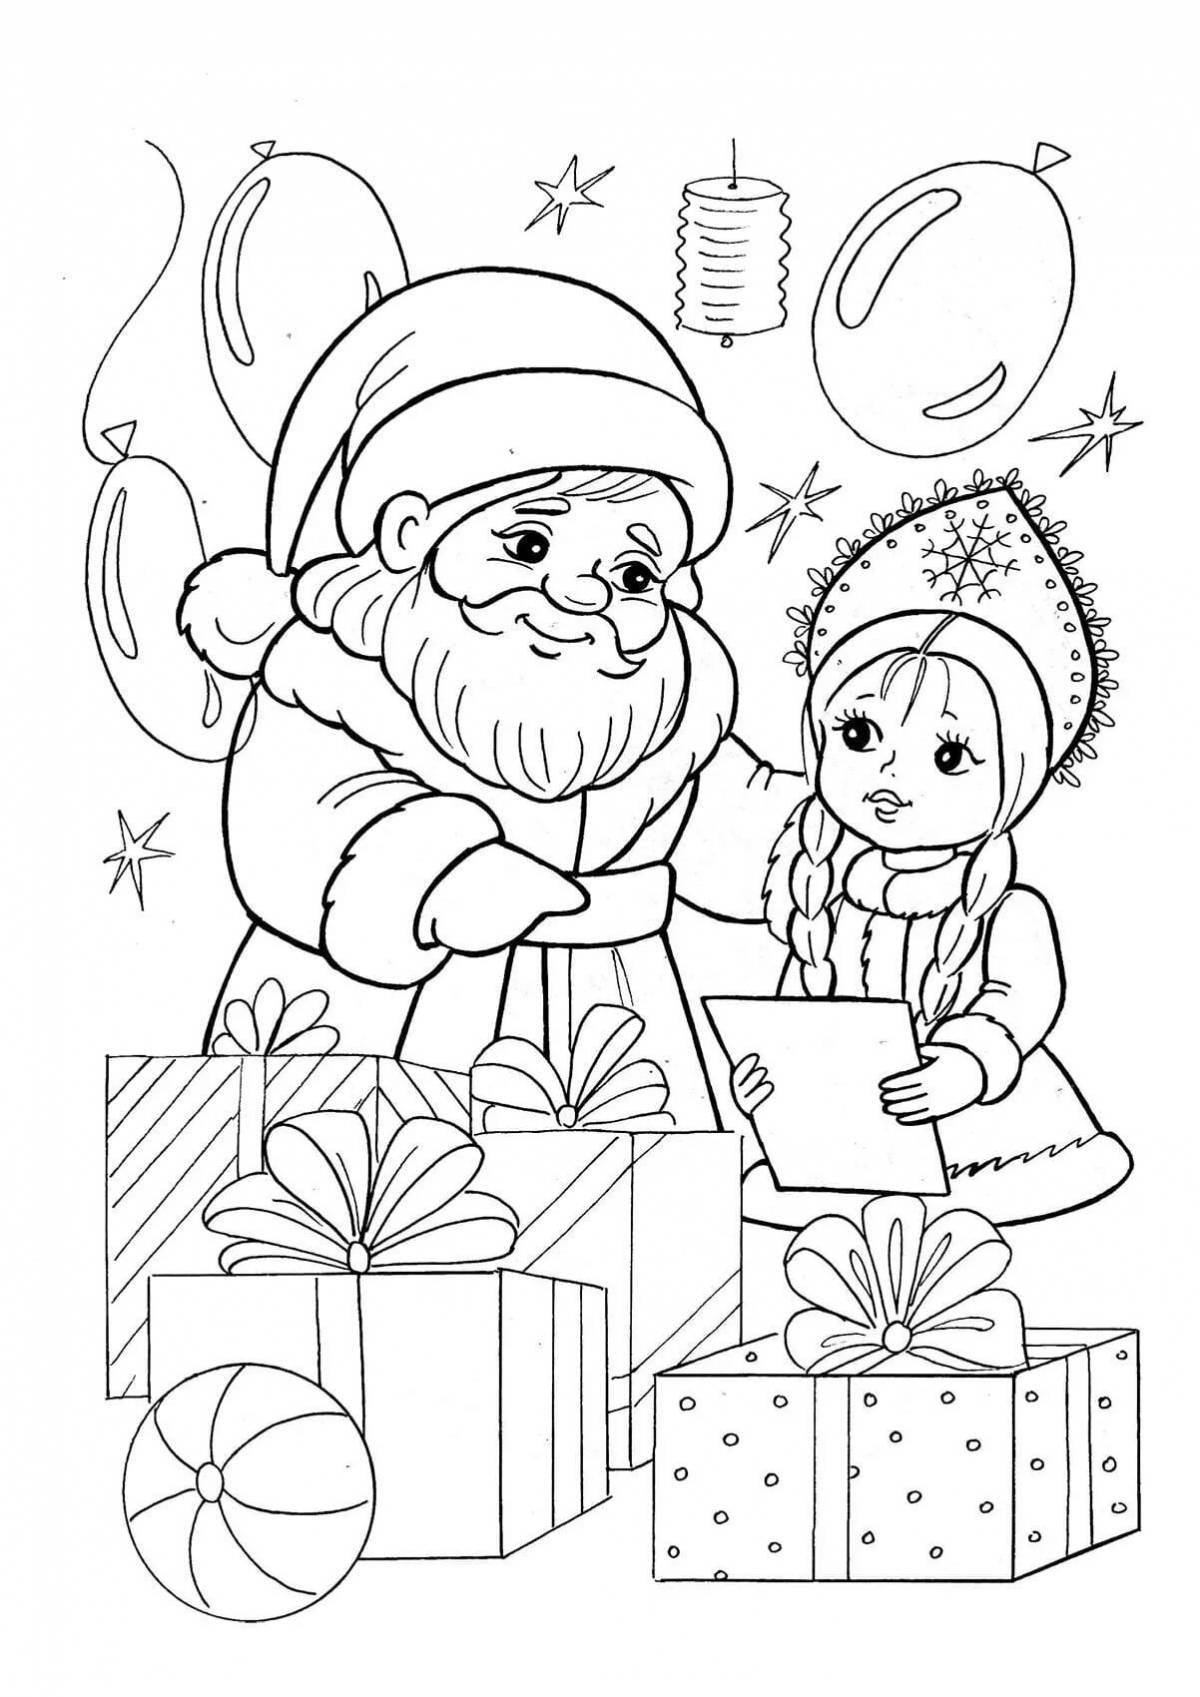 Coloring page charming snow maiden